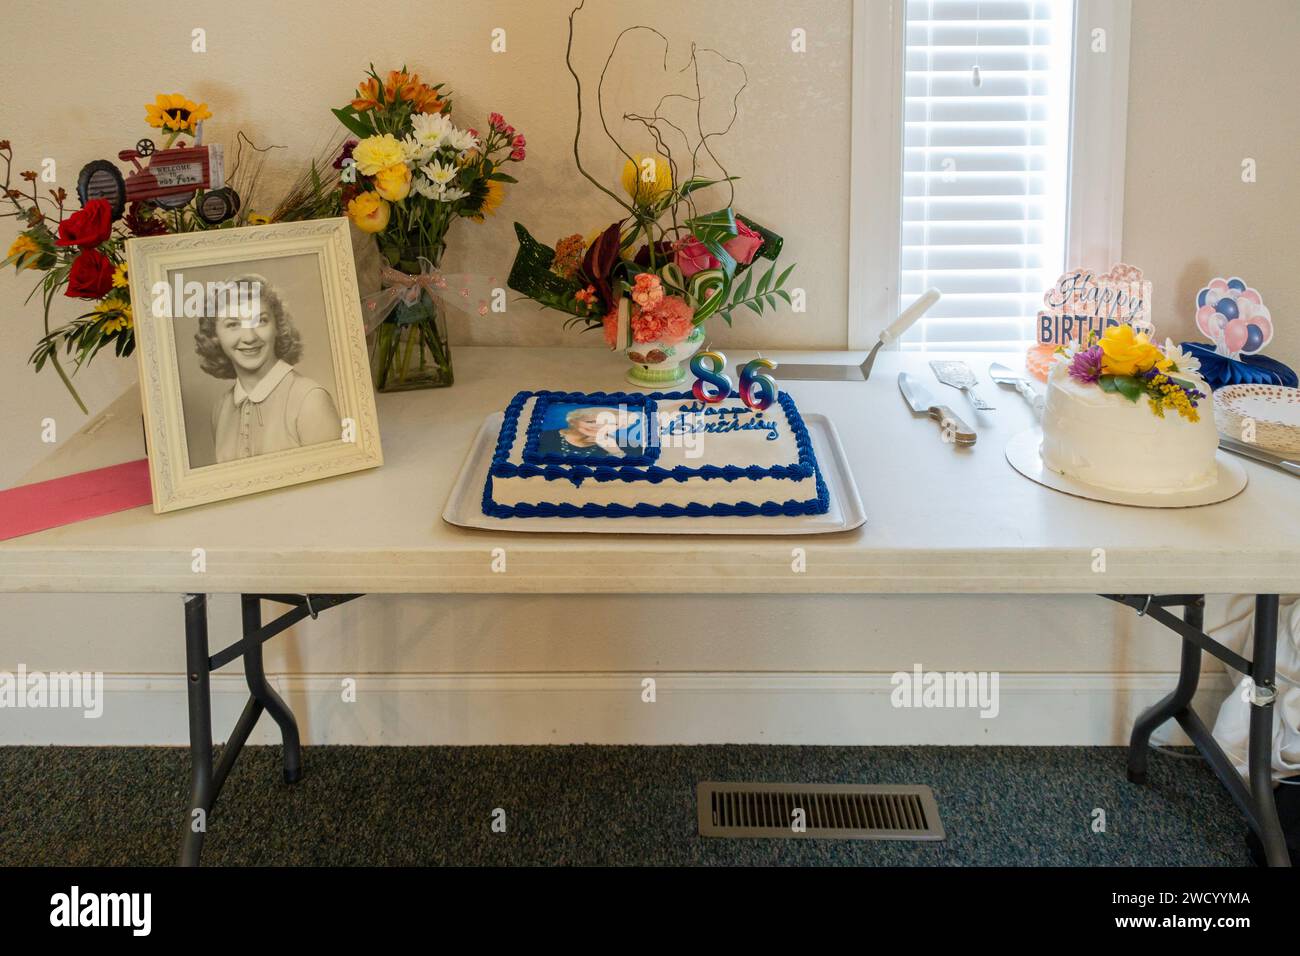 A serving table with two birthday cakes, a photograph, vases of flowers & a Happy Birthday greeting.   USA.b Stock Photo